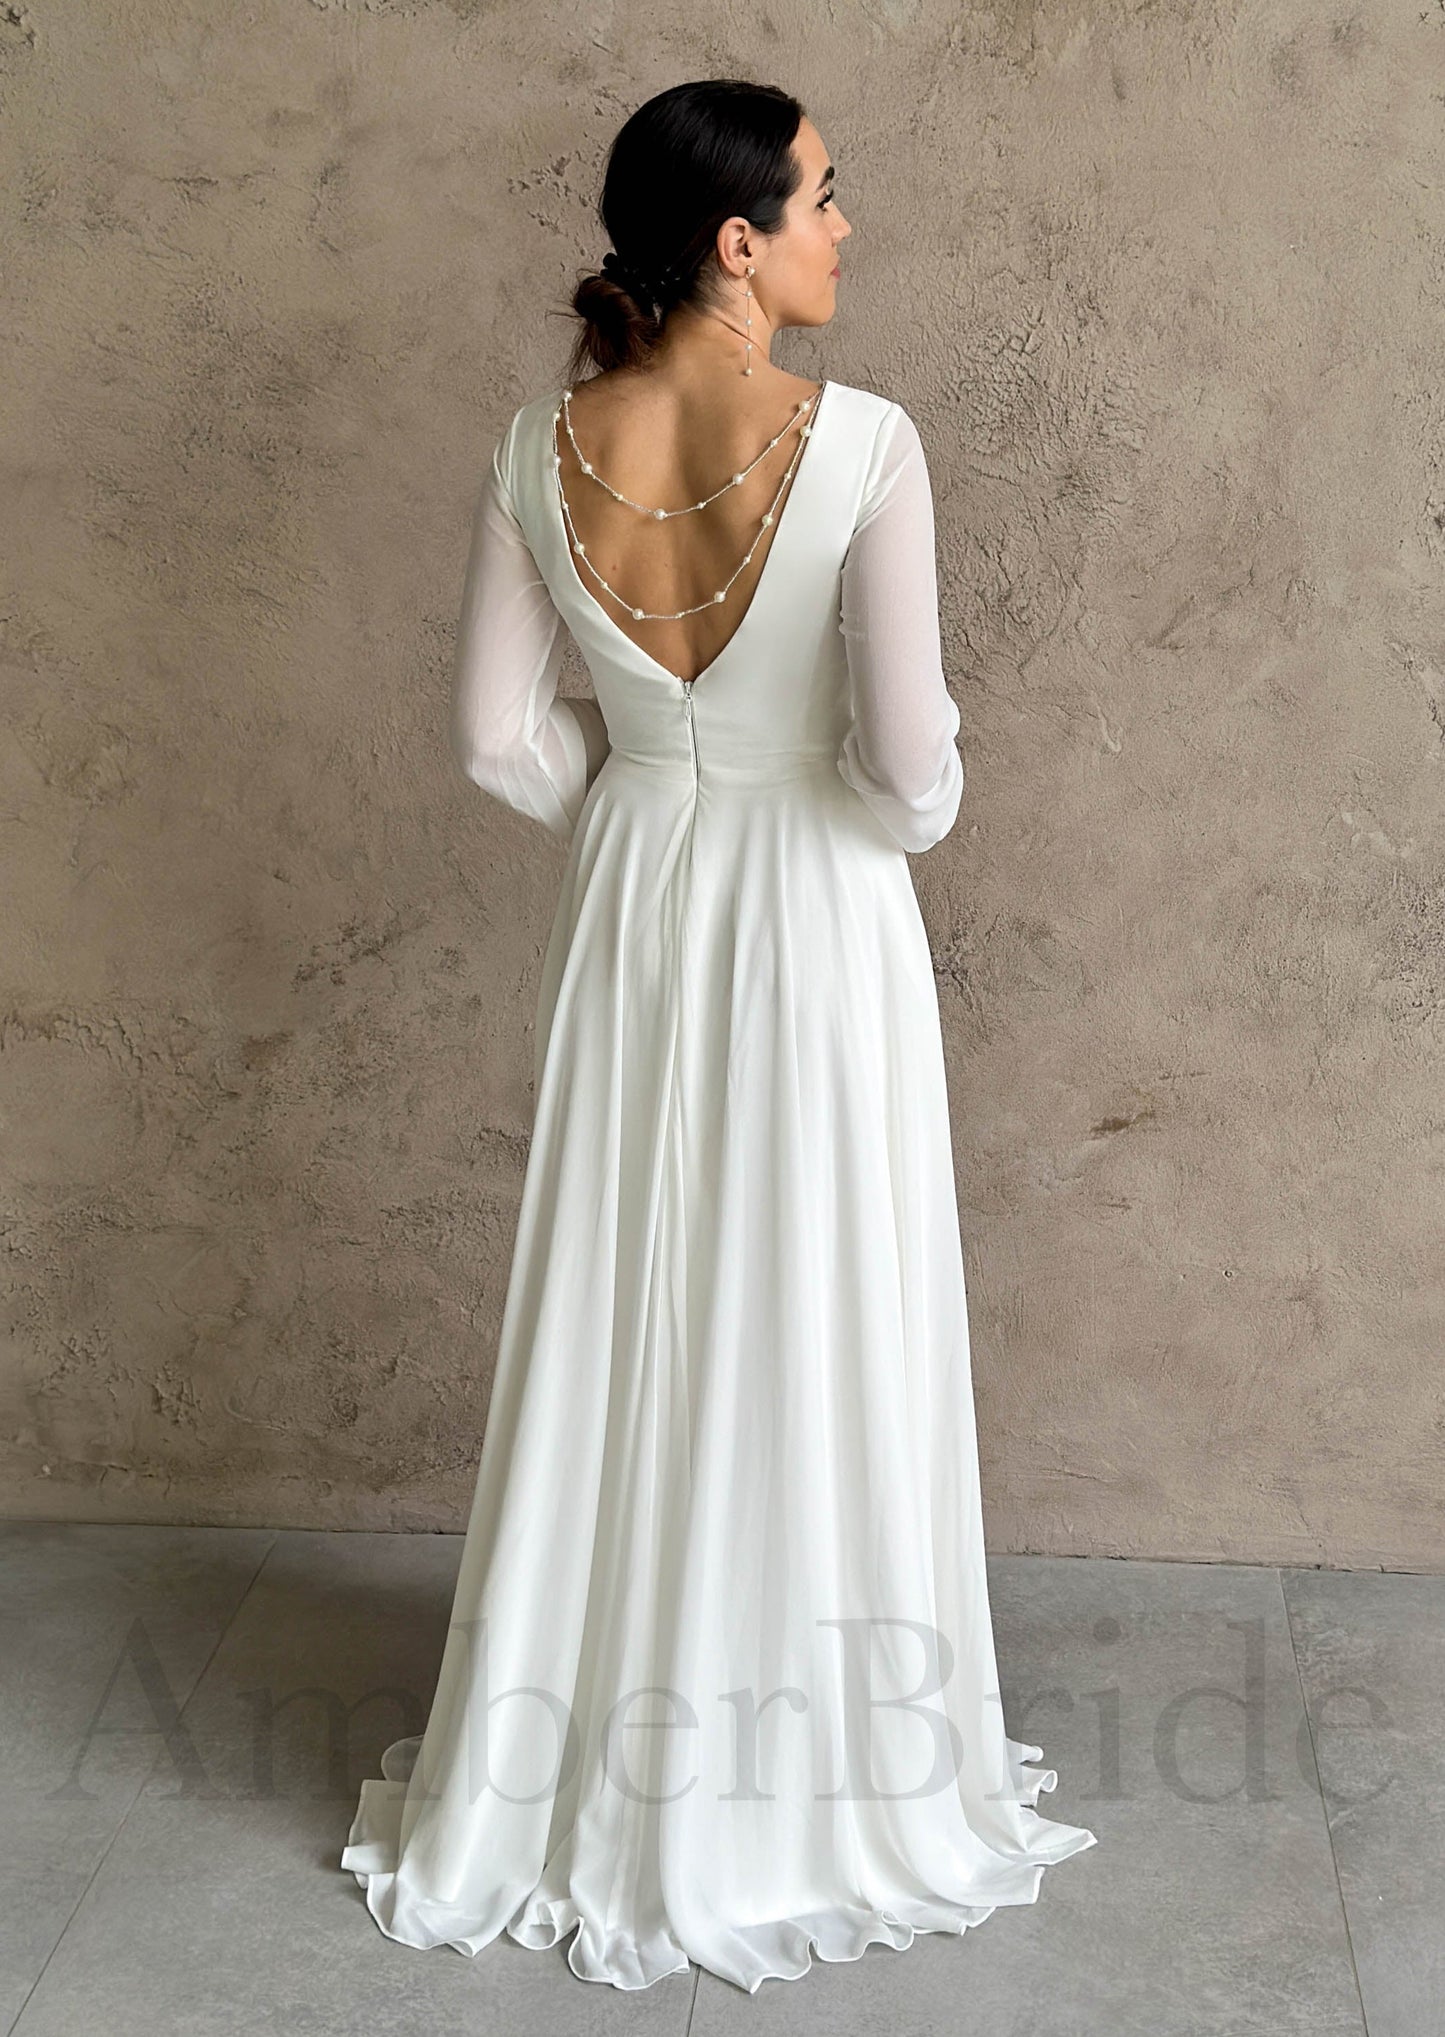 Elegant A Line Chiffon Wedding Dress with Boat Neck and Bishop Sleeves